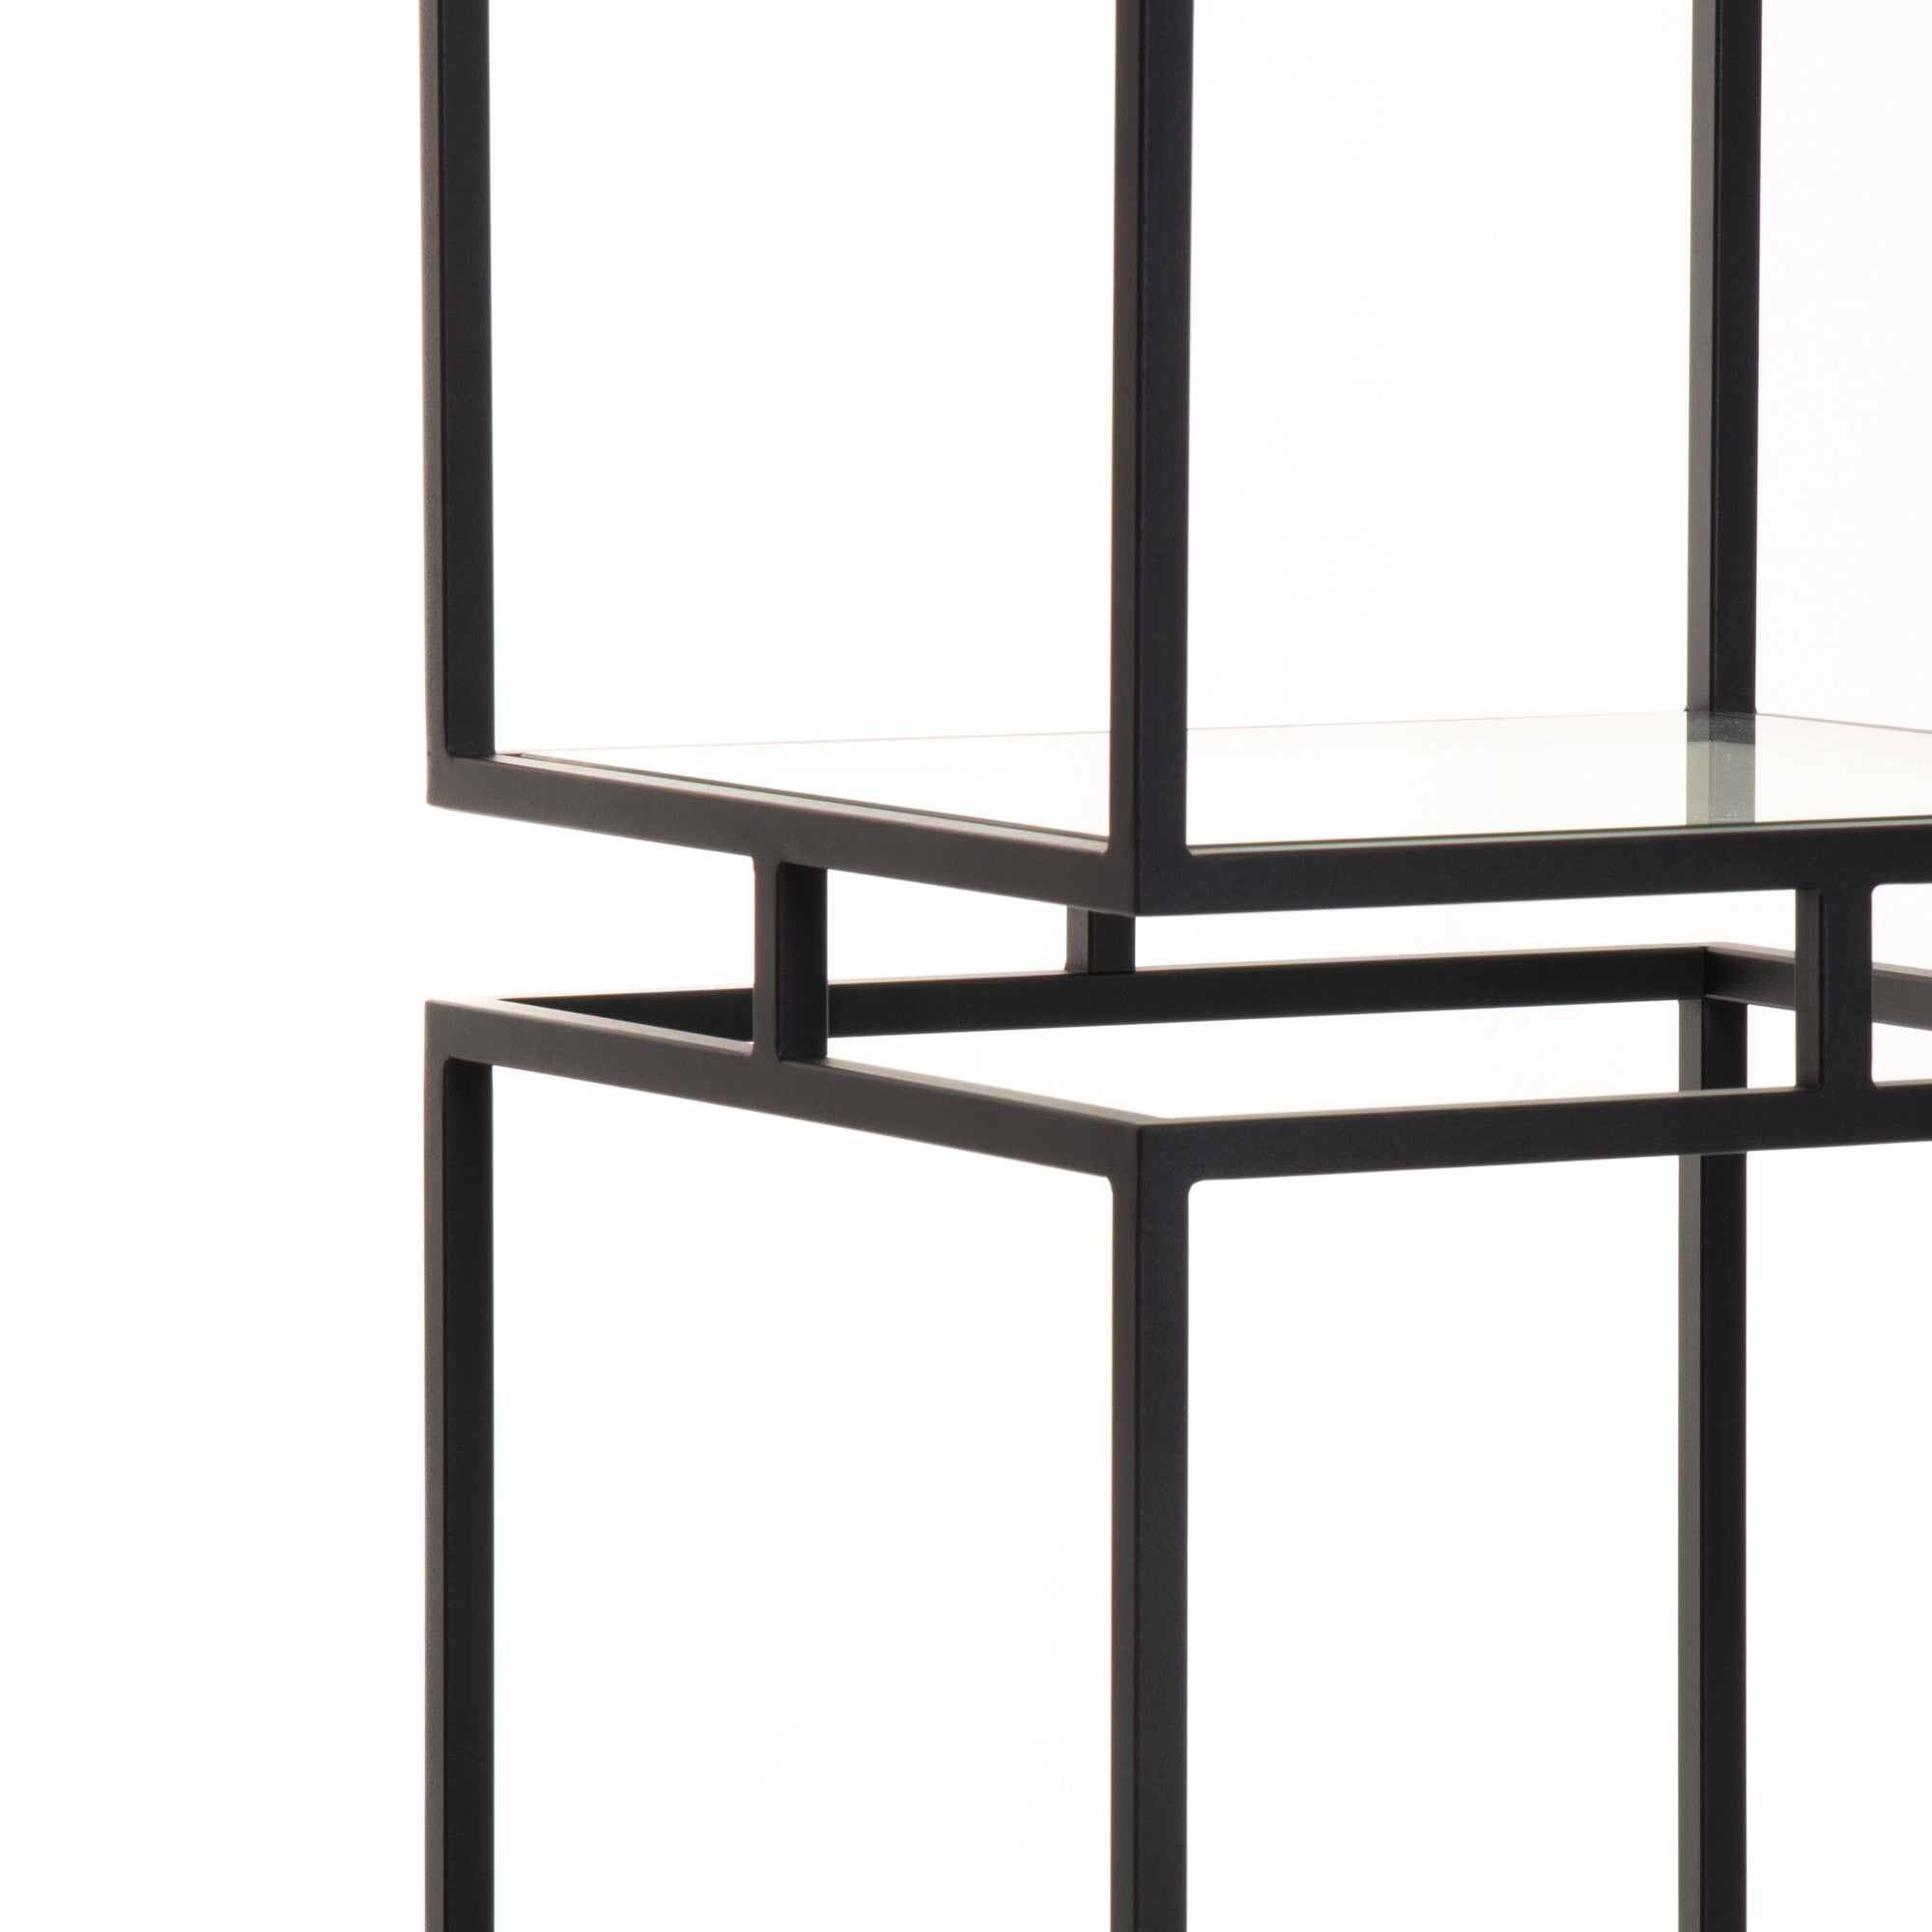 Cube Display Unit With Clear Glass & Black Steel (Assembly Required)